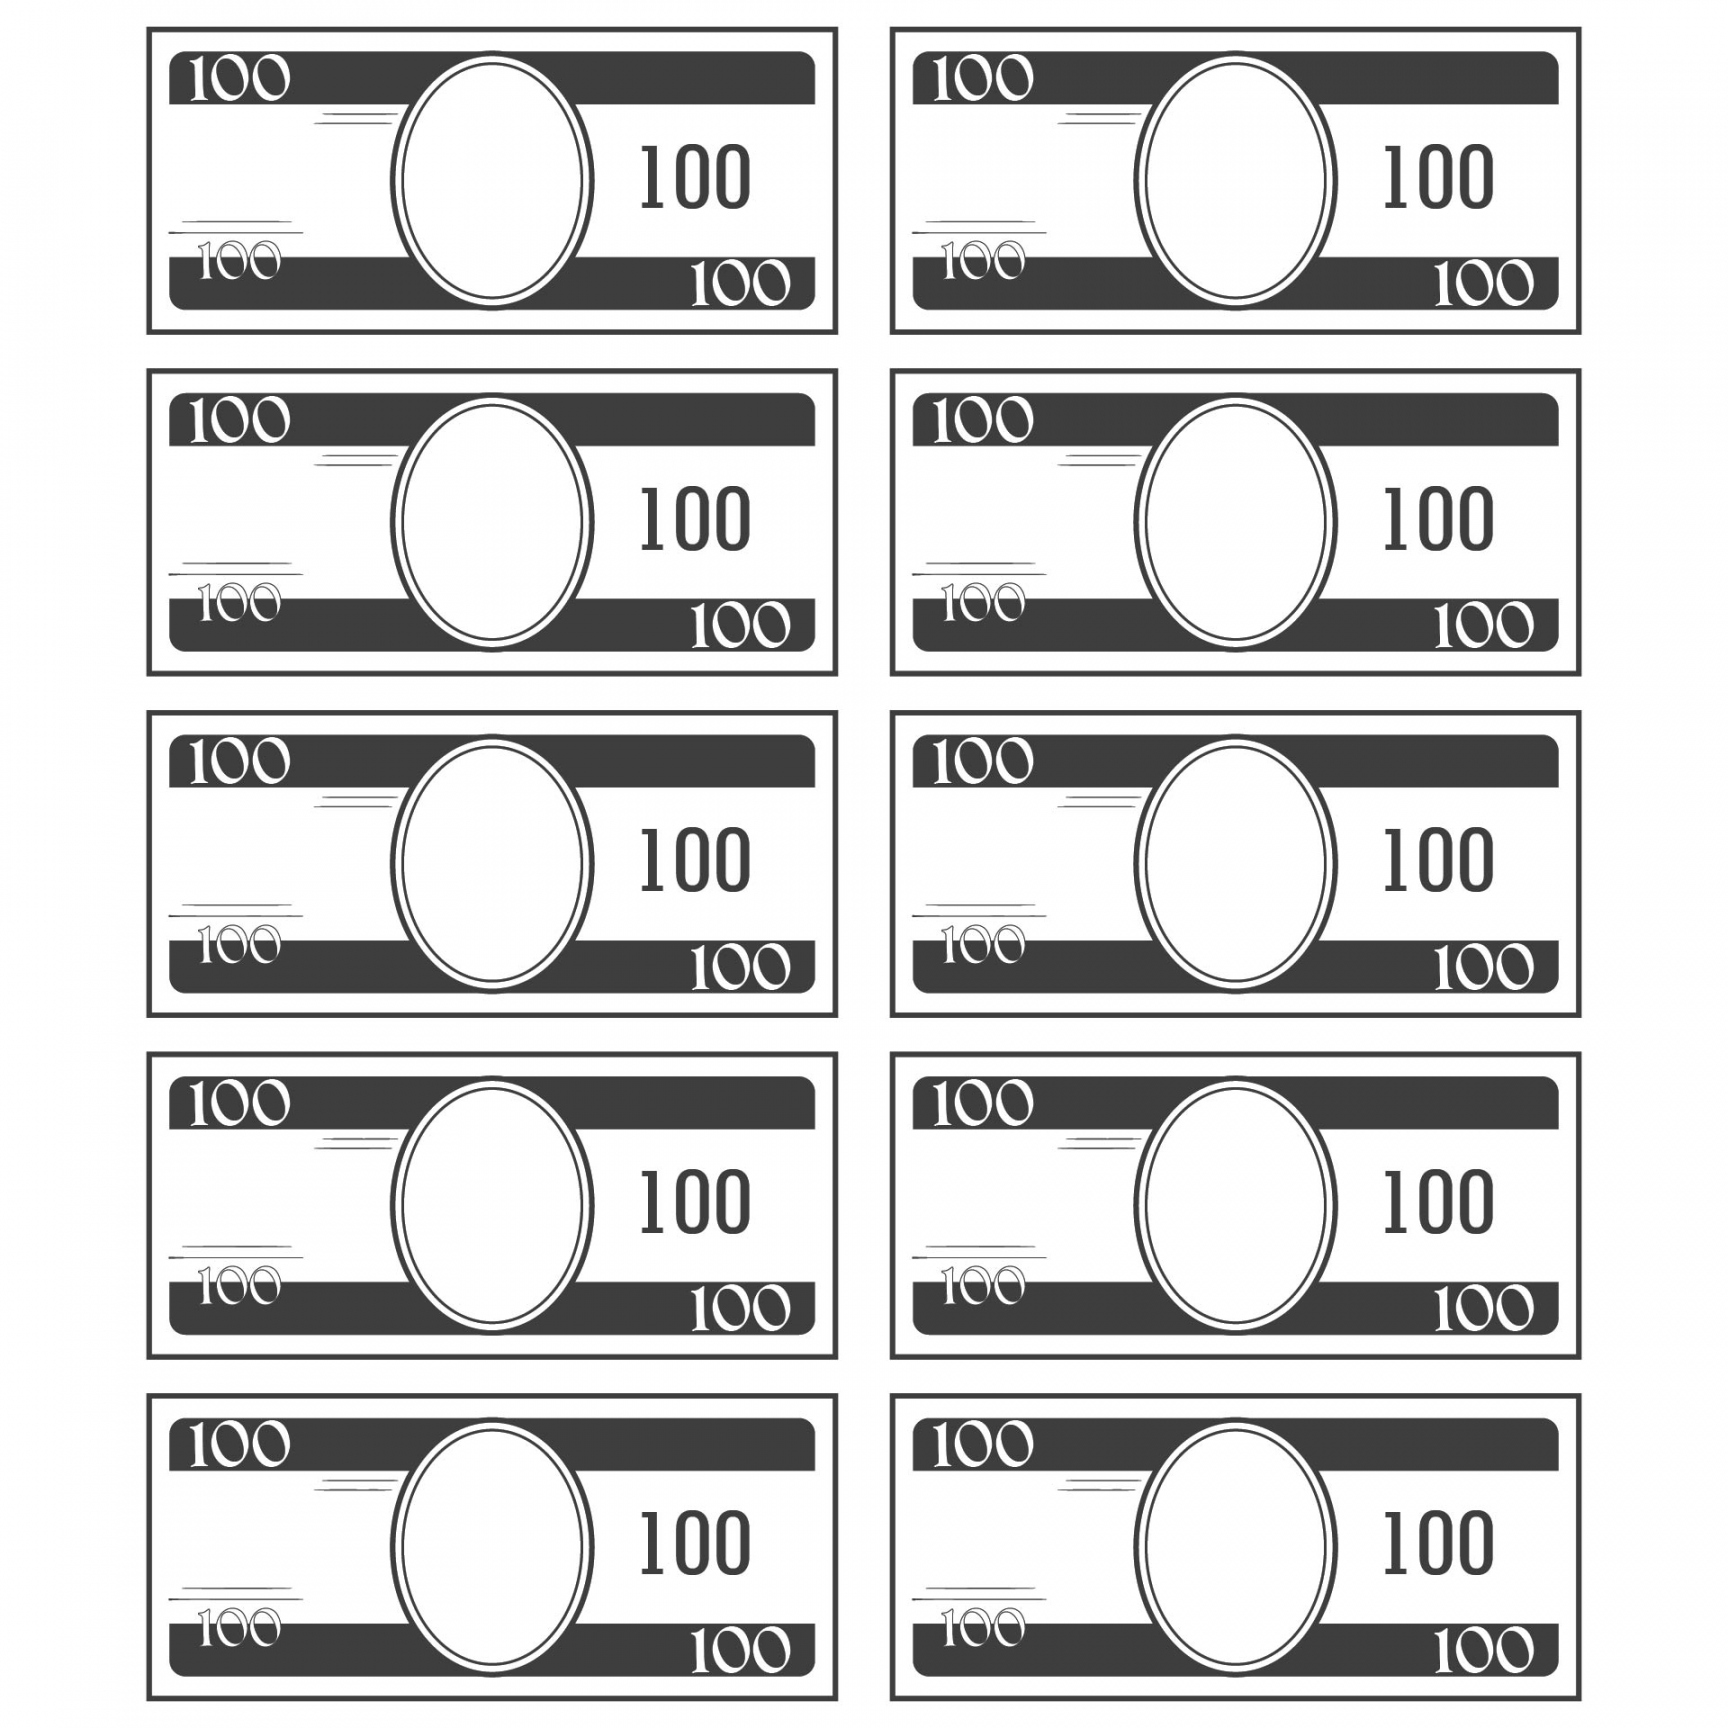 Best Printable Play Money Actual Size - printablee - Free Printable Fake Money Template For Teachers